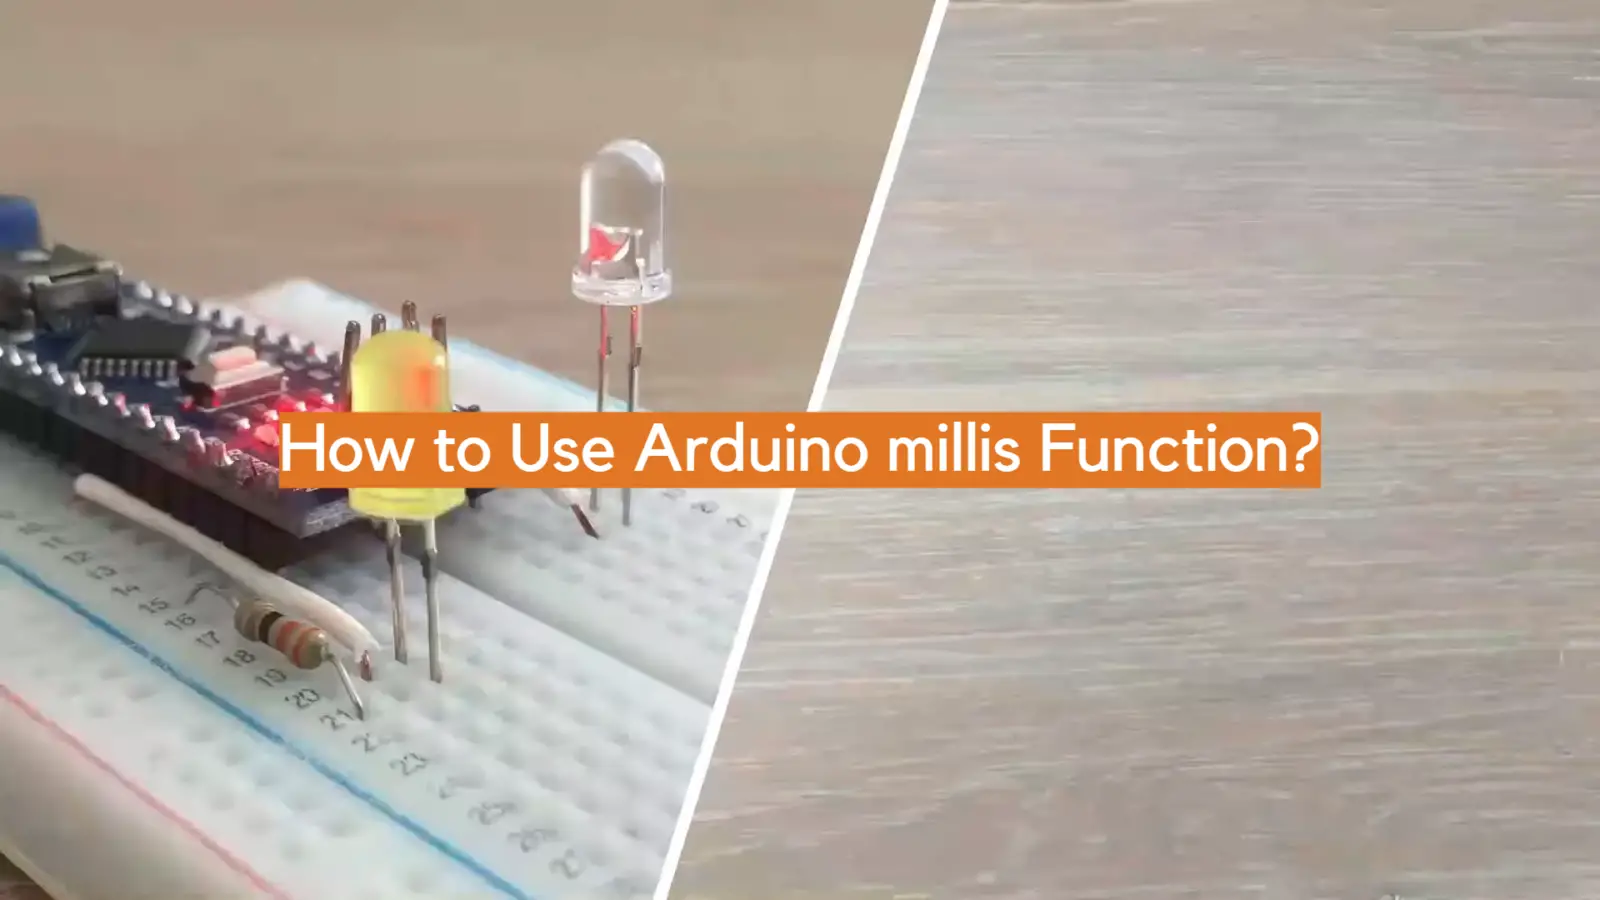 How to Use Arduino millis Function?